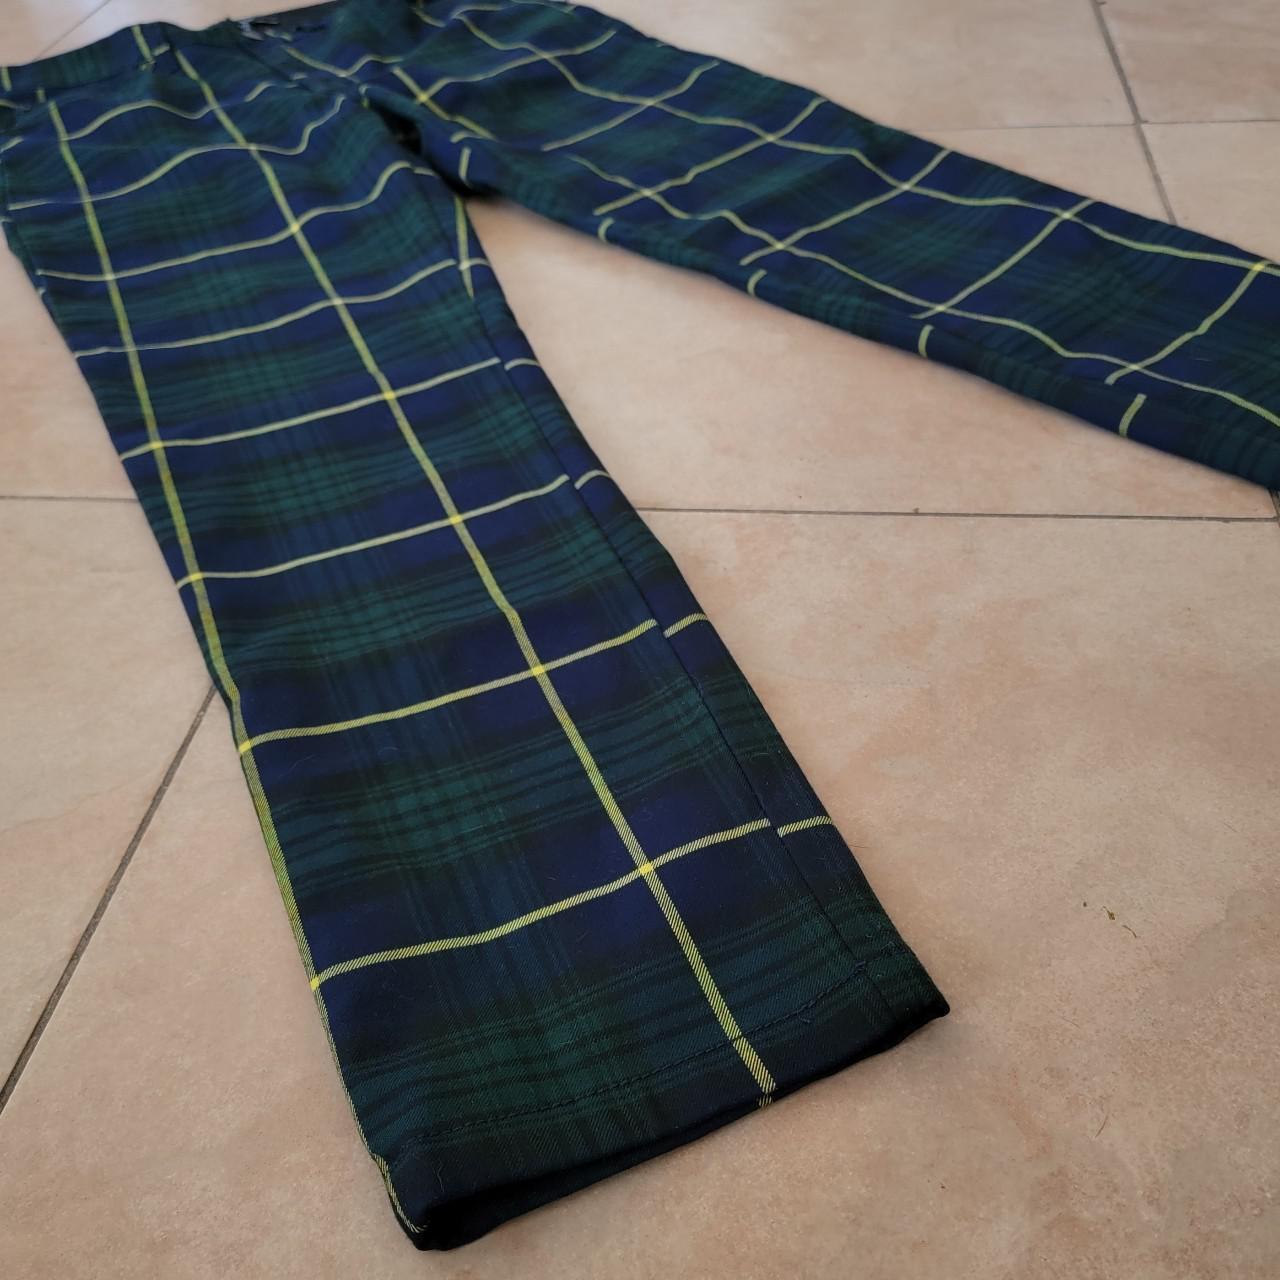 Product Image 2 - Blue & Green Plaid Pants

Brand